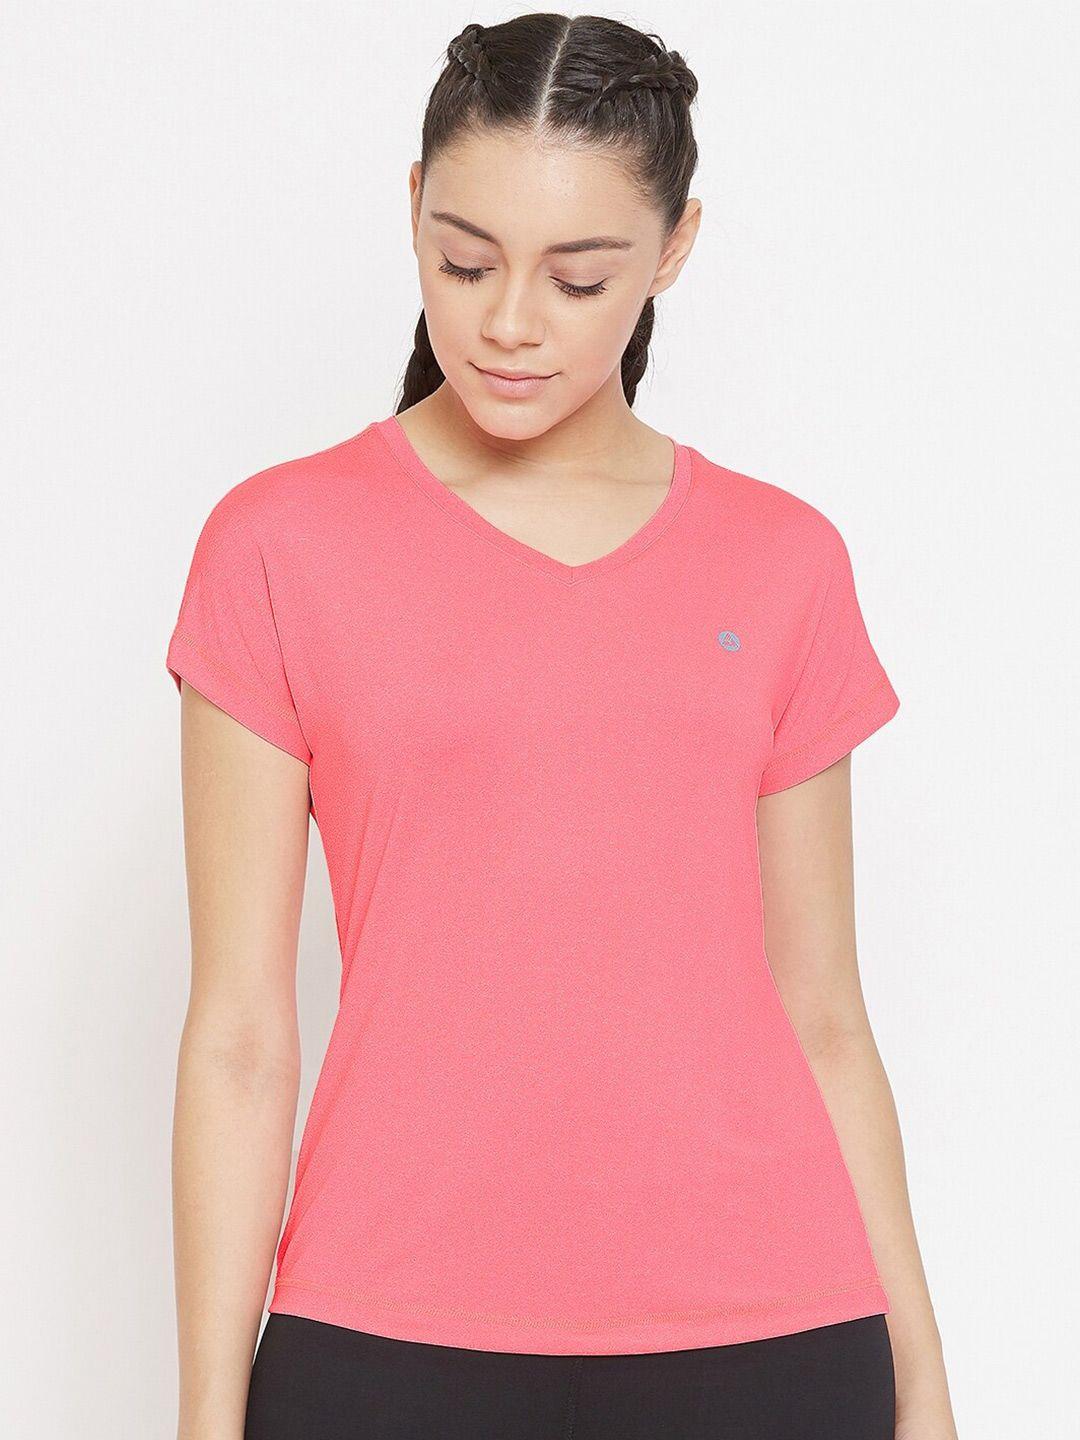 athlisis-women-coral-v-neck-extended-sleeves-dri-fit-t-shirt